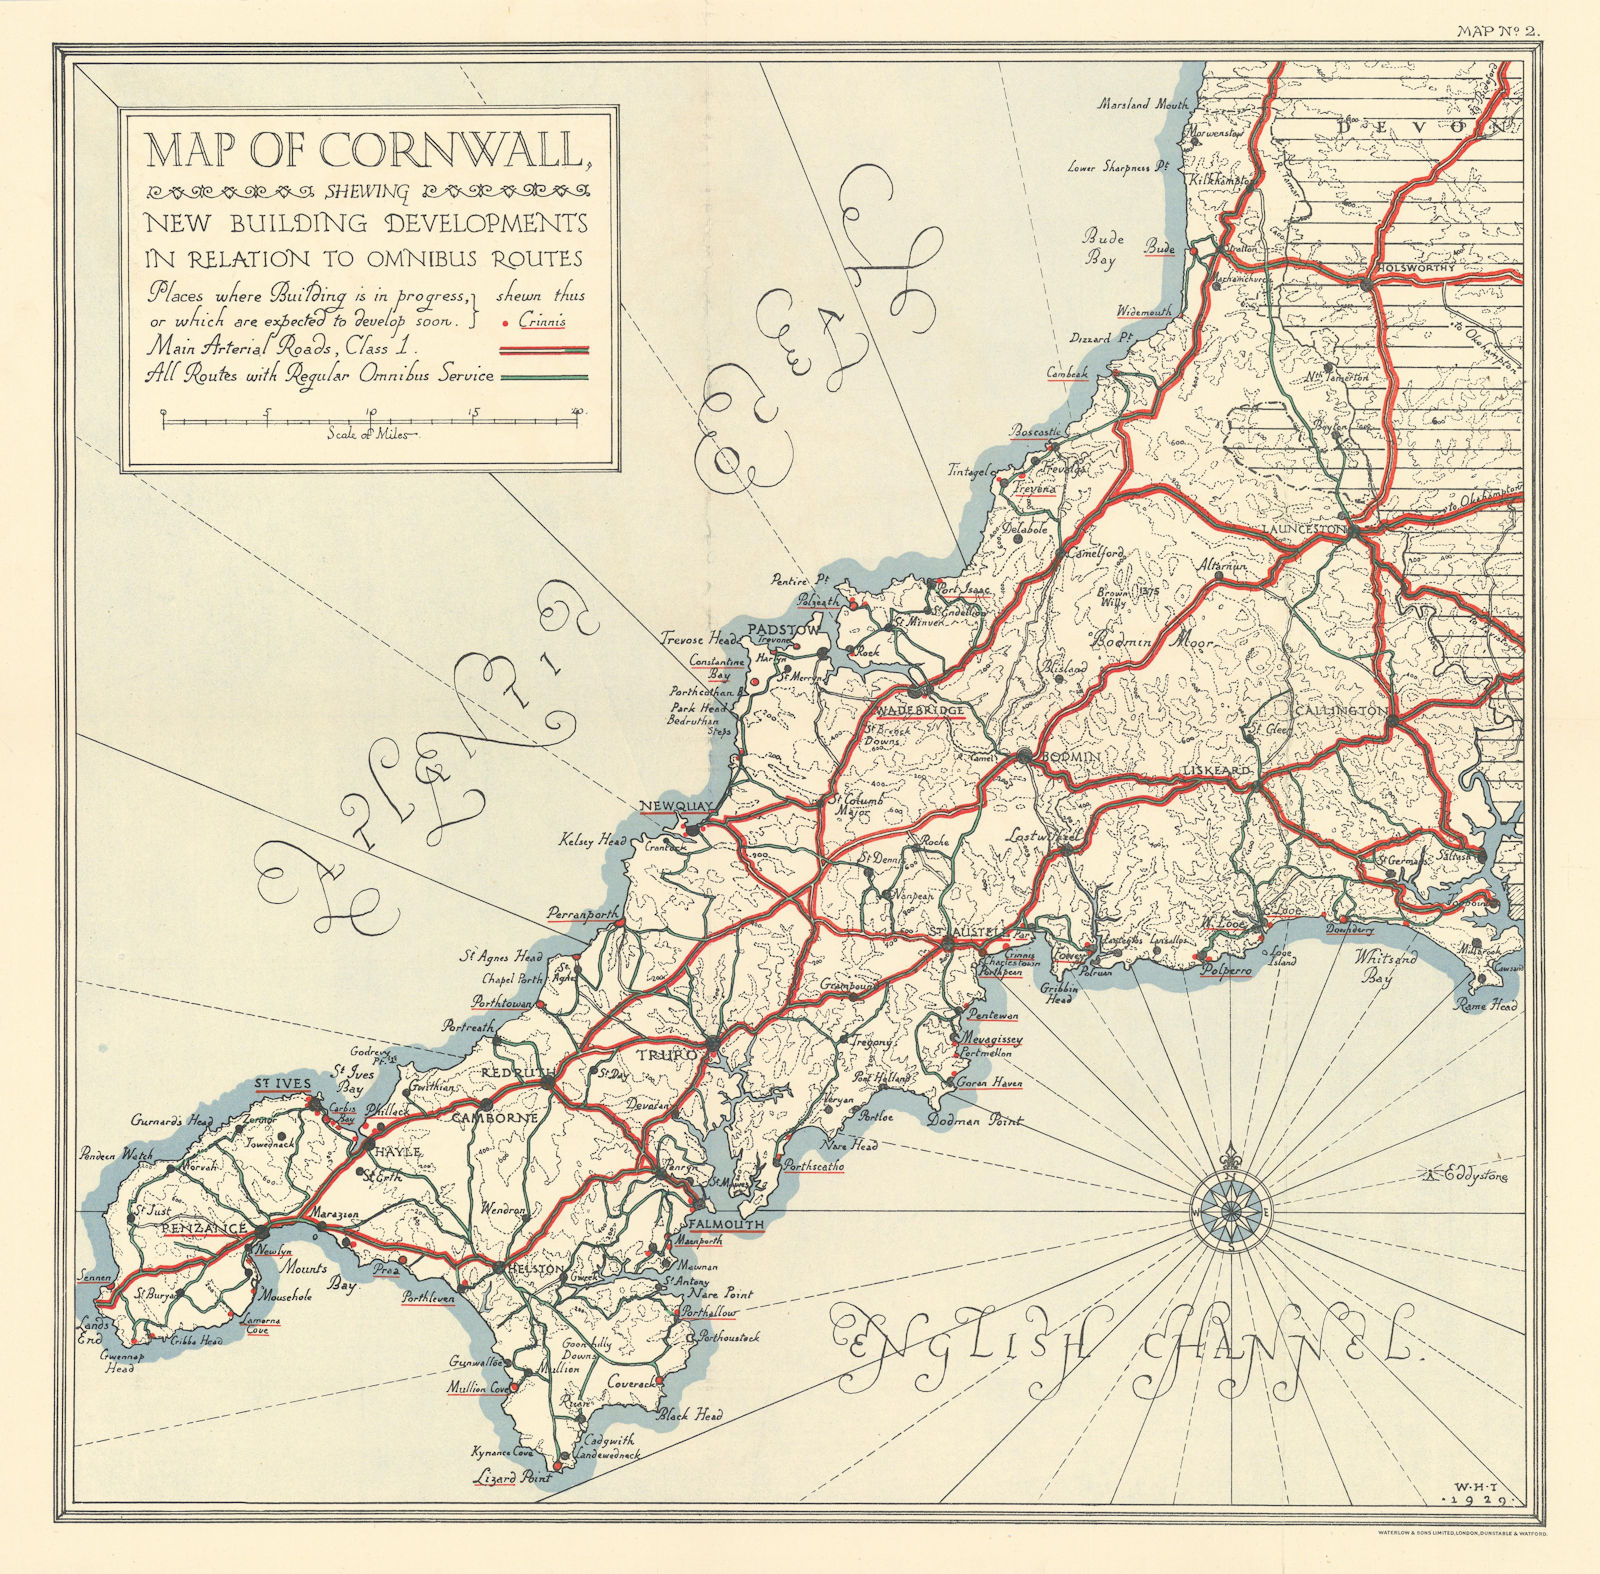 Associate Product CORNWALL. New building developments & bus routes. HARDING THOMPSON 1930 map